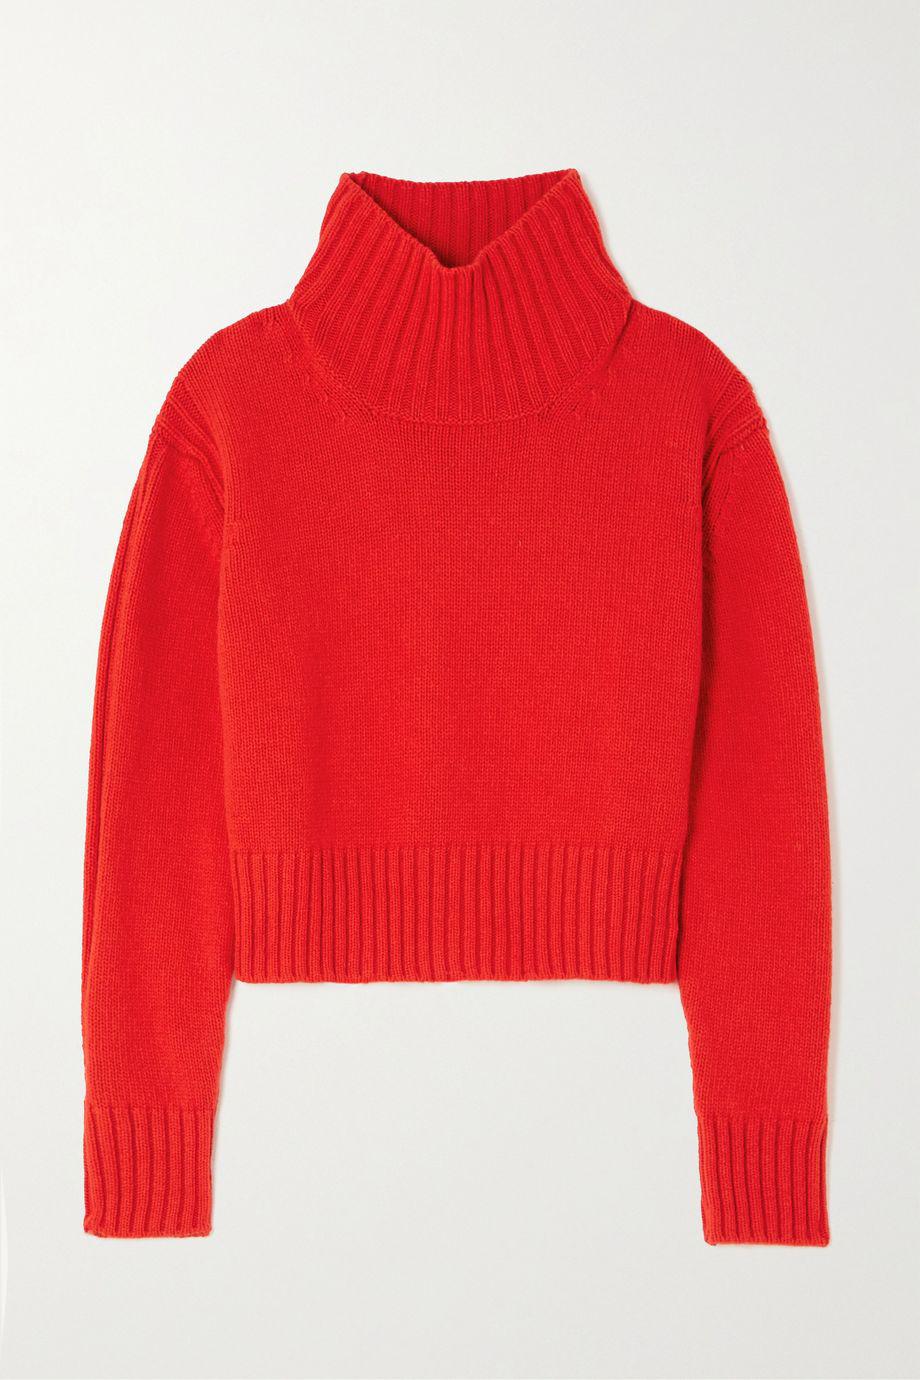 + NET SUSTAIN Fintra cropped wool turtleneck sweater by &DAUGHTER